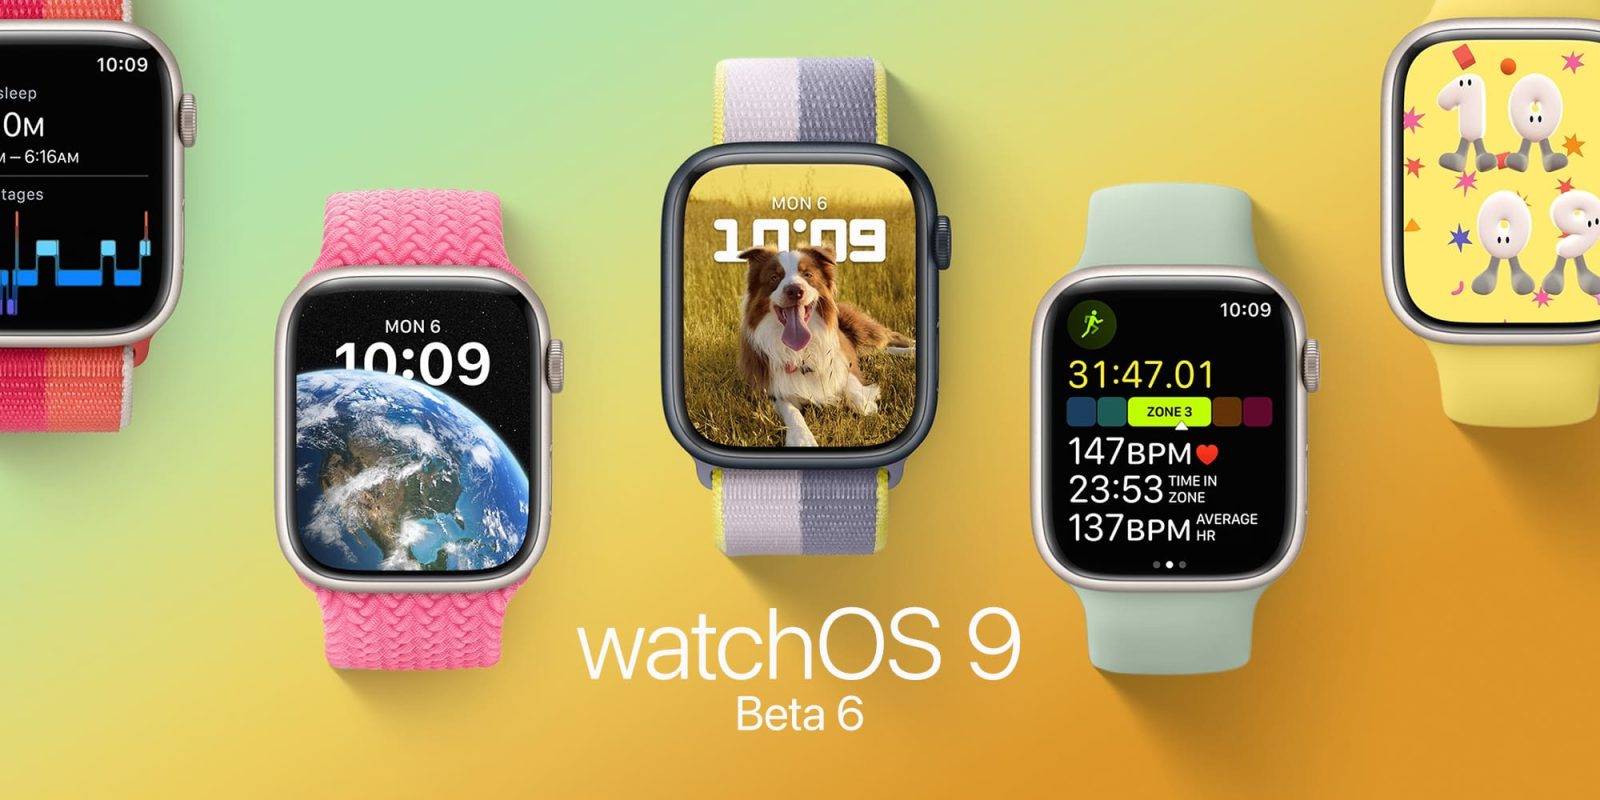 watchOS 9 beta 6 is now available to developers